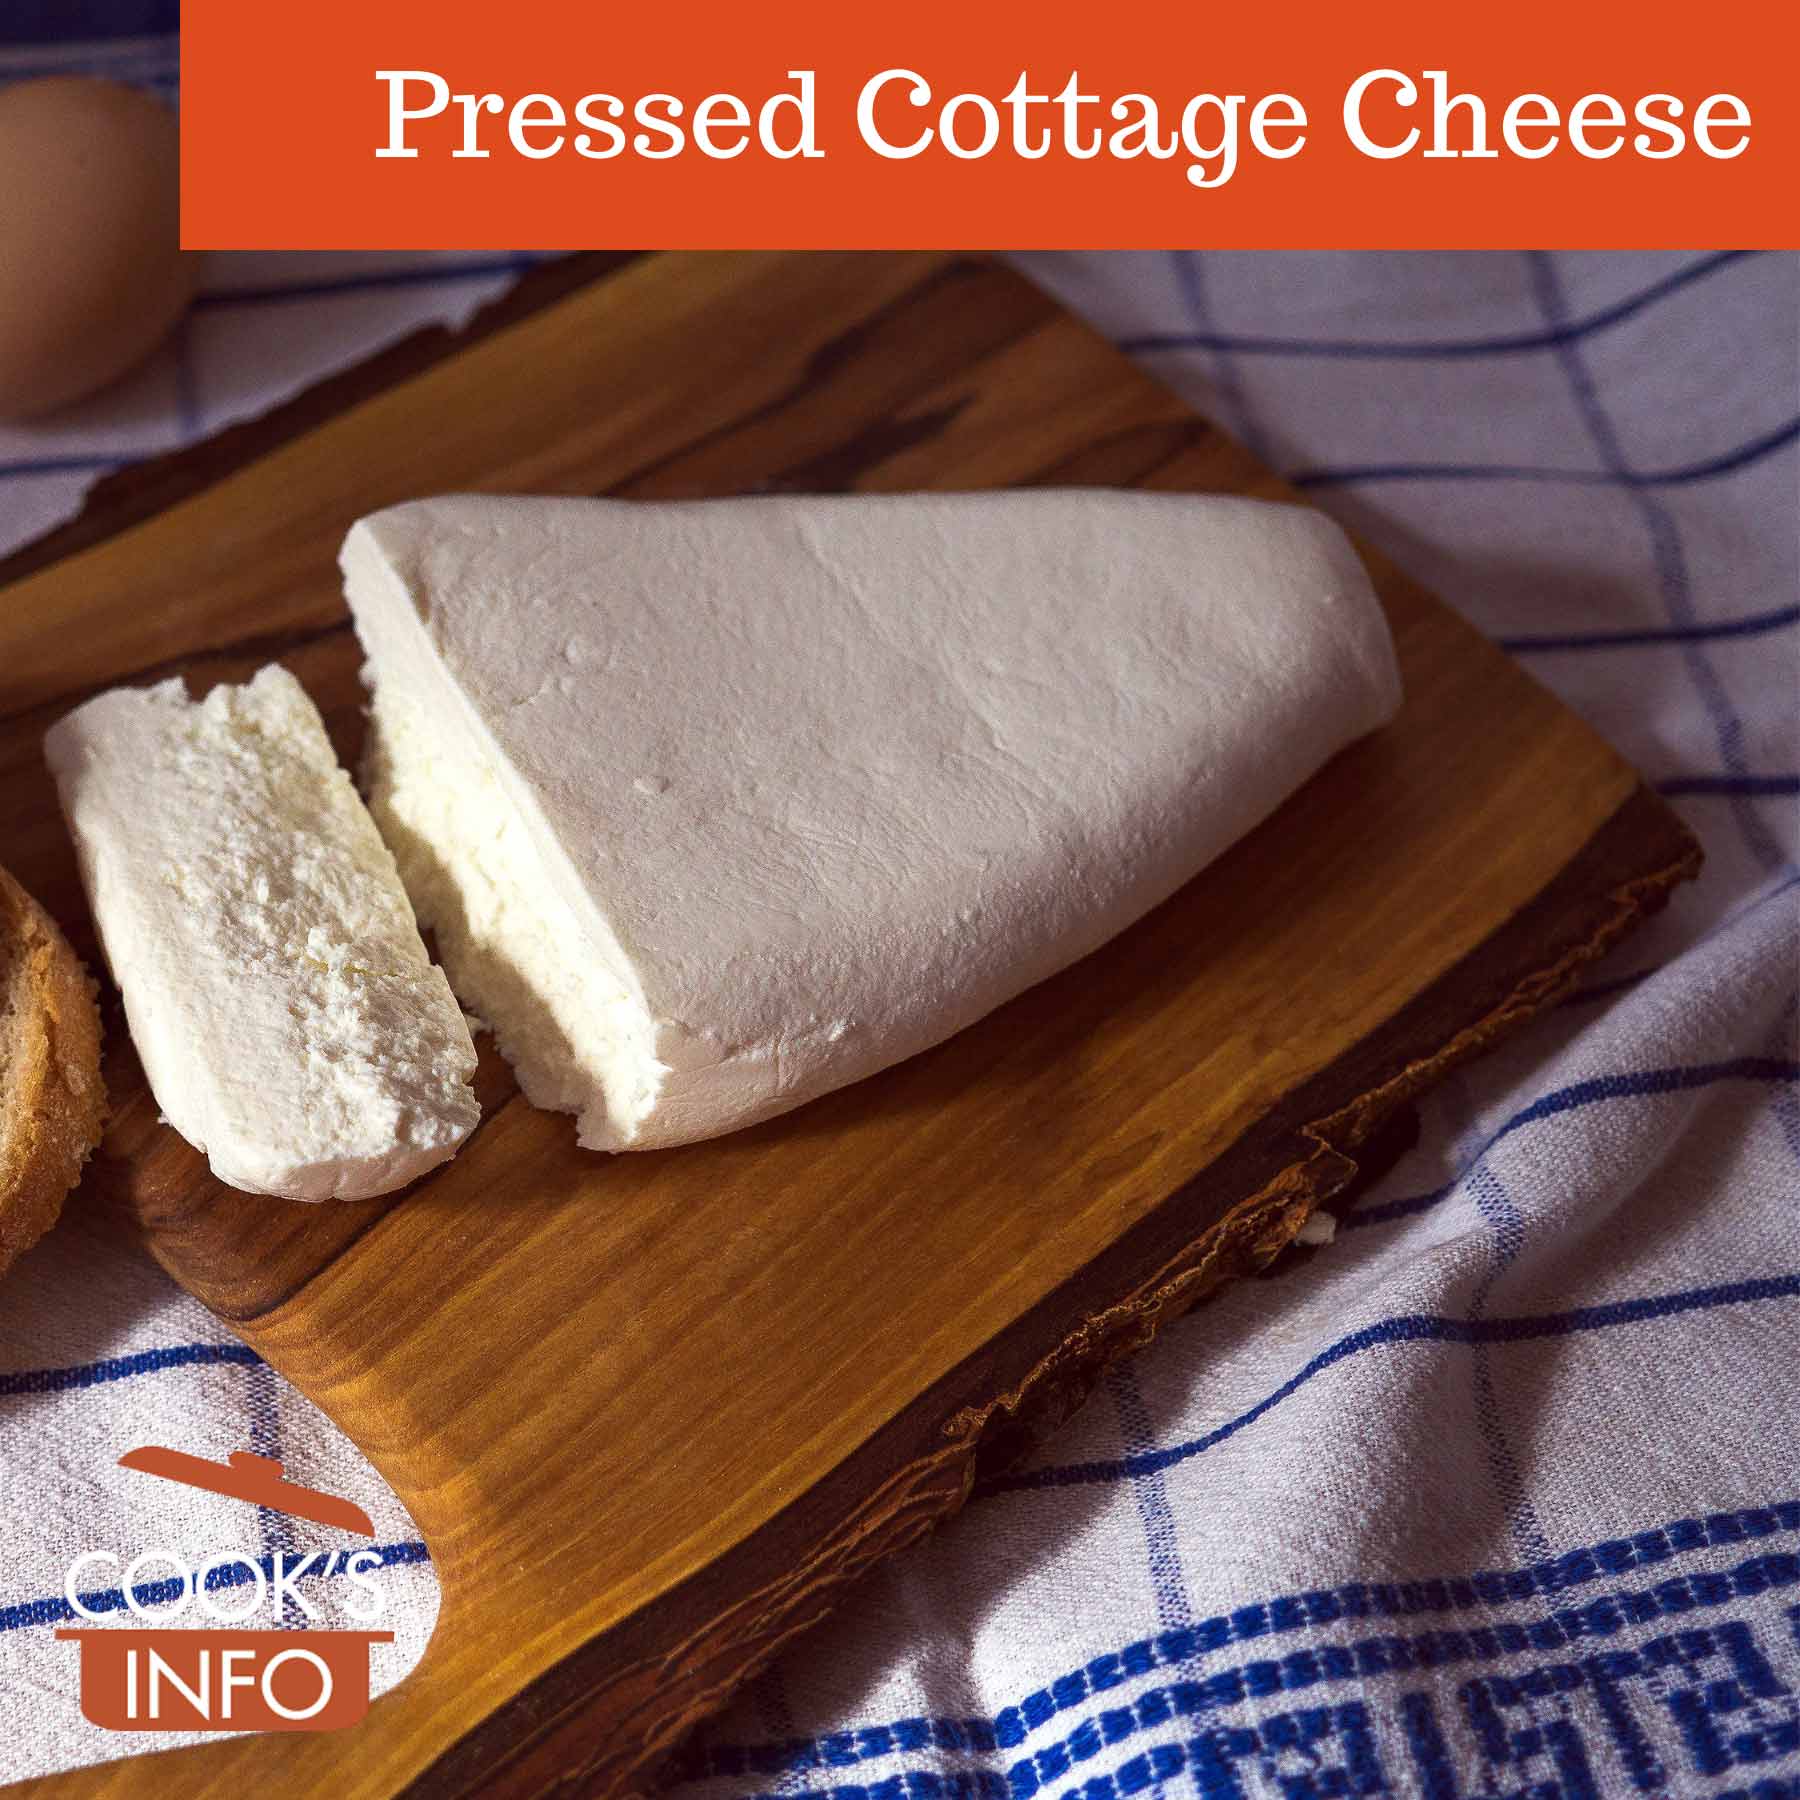 Pressed cottage cheese